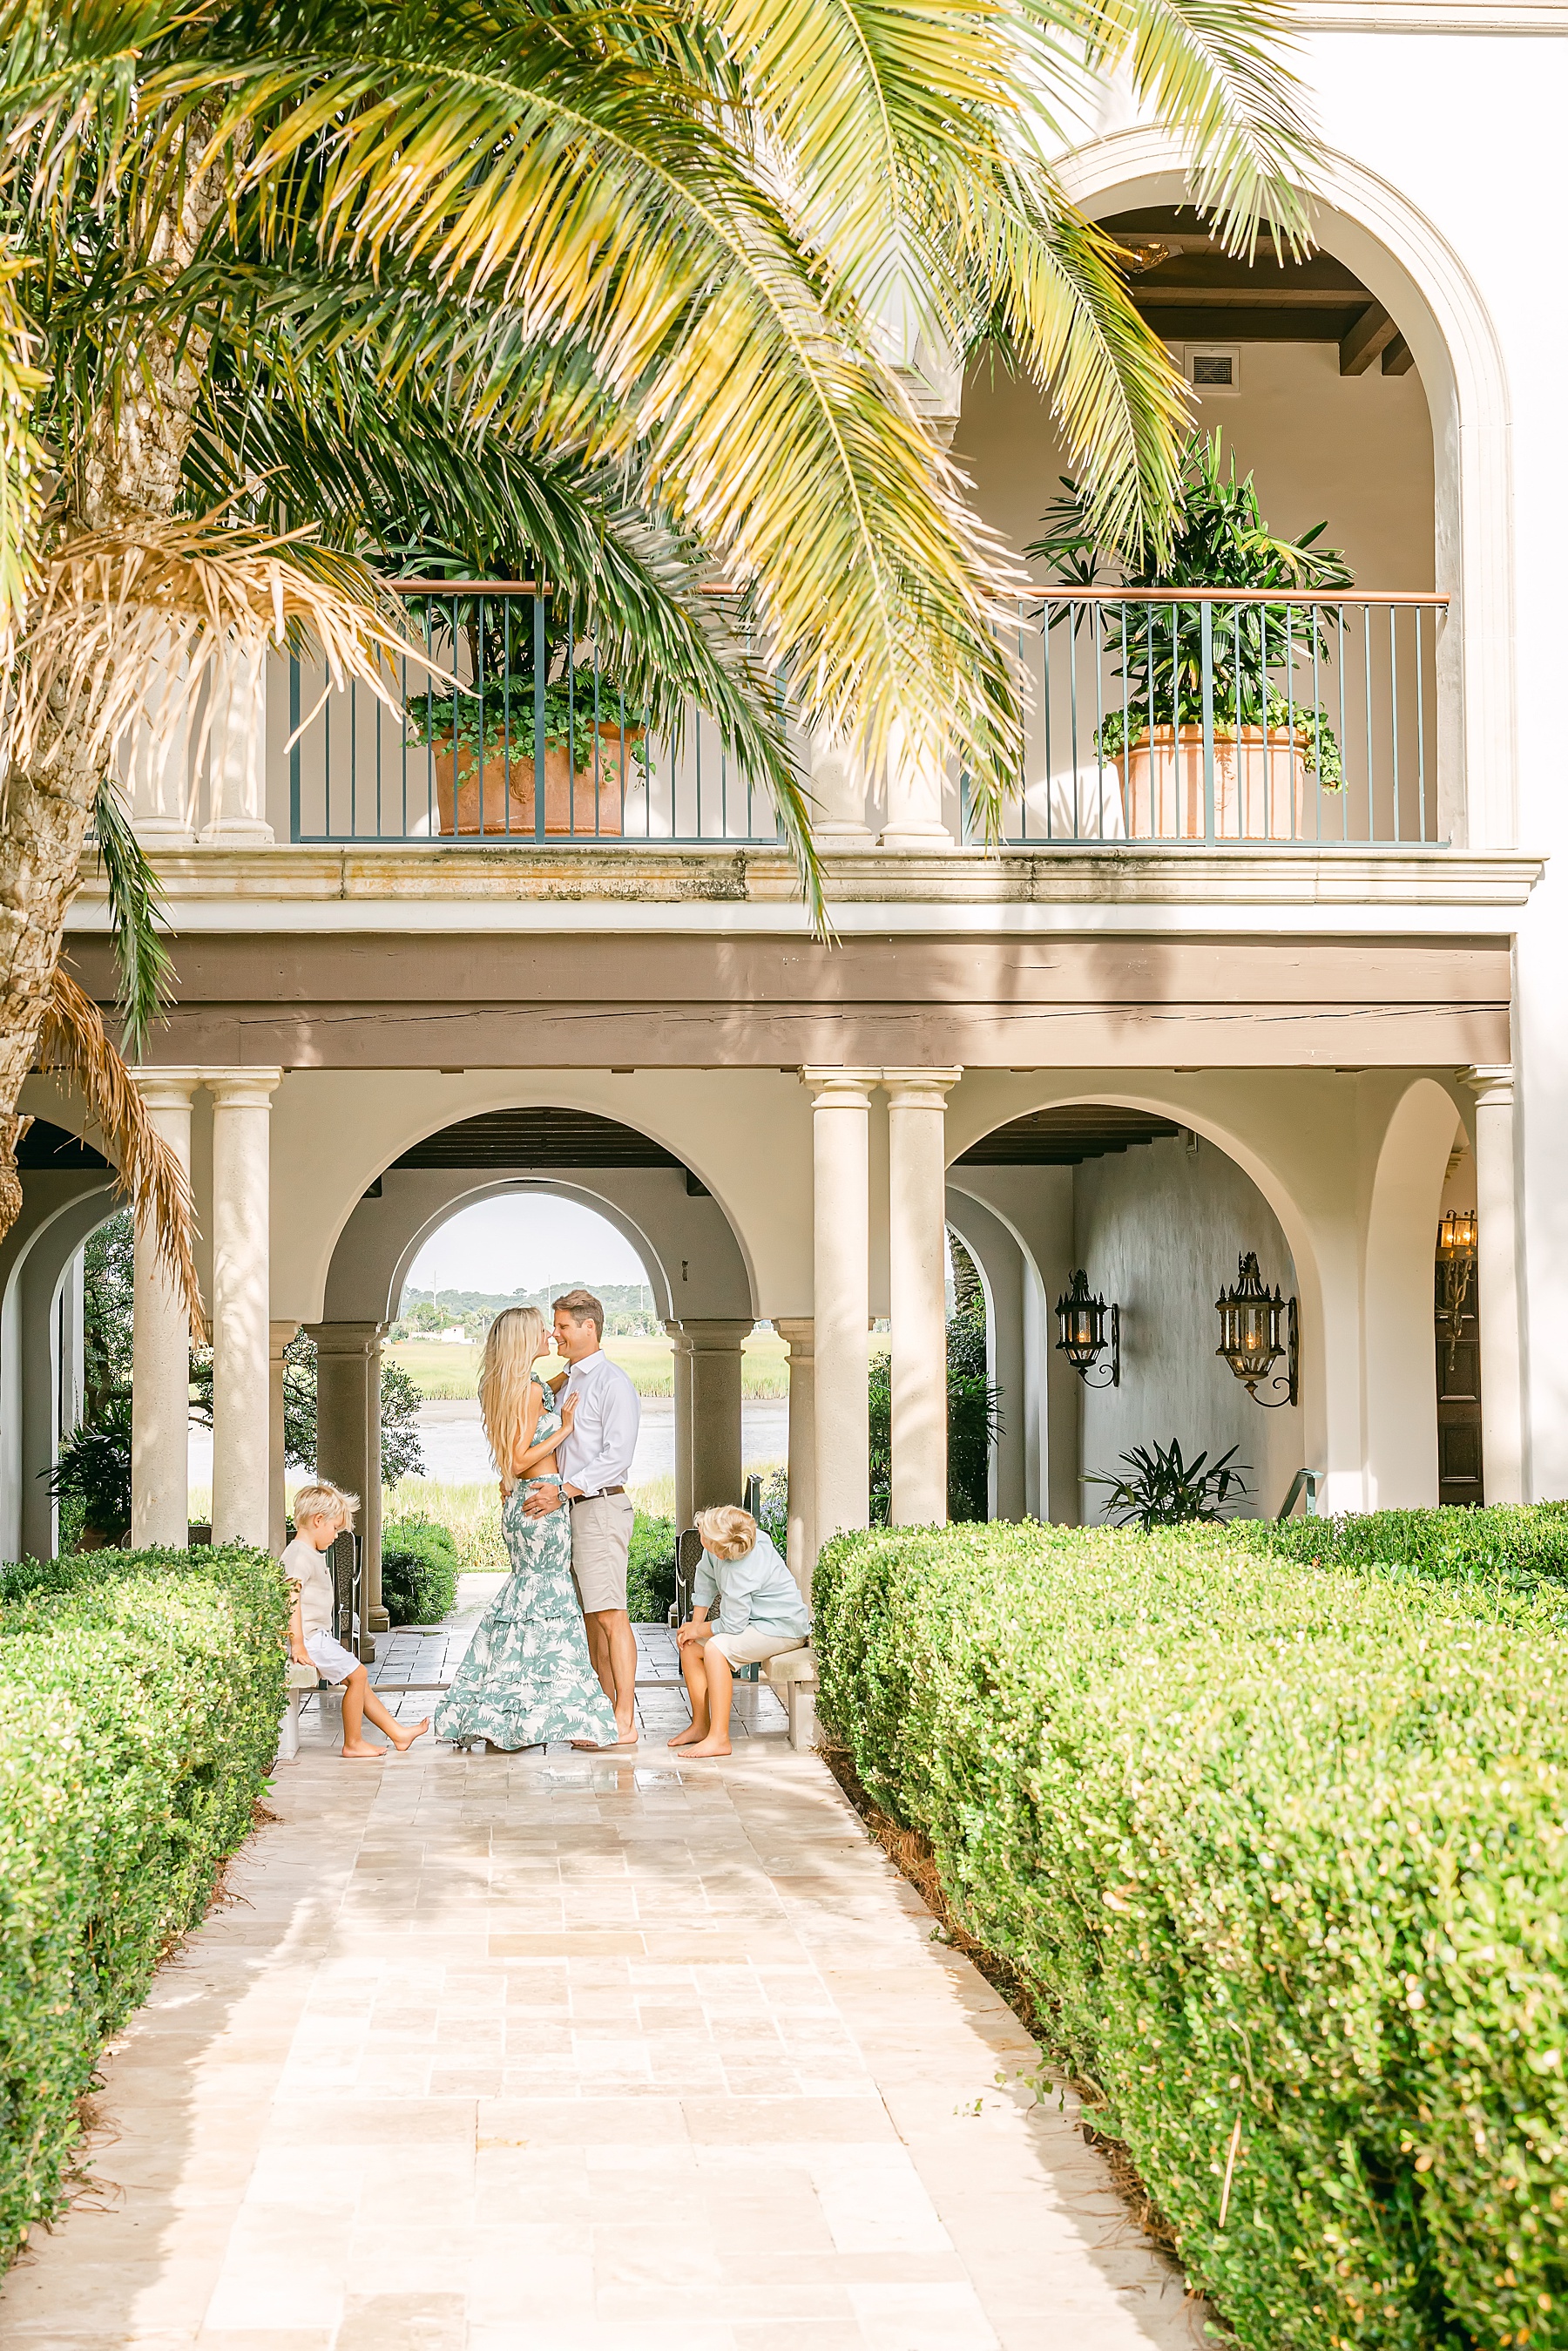 family standing under archway at the cloister sea island